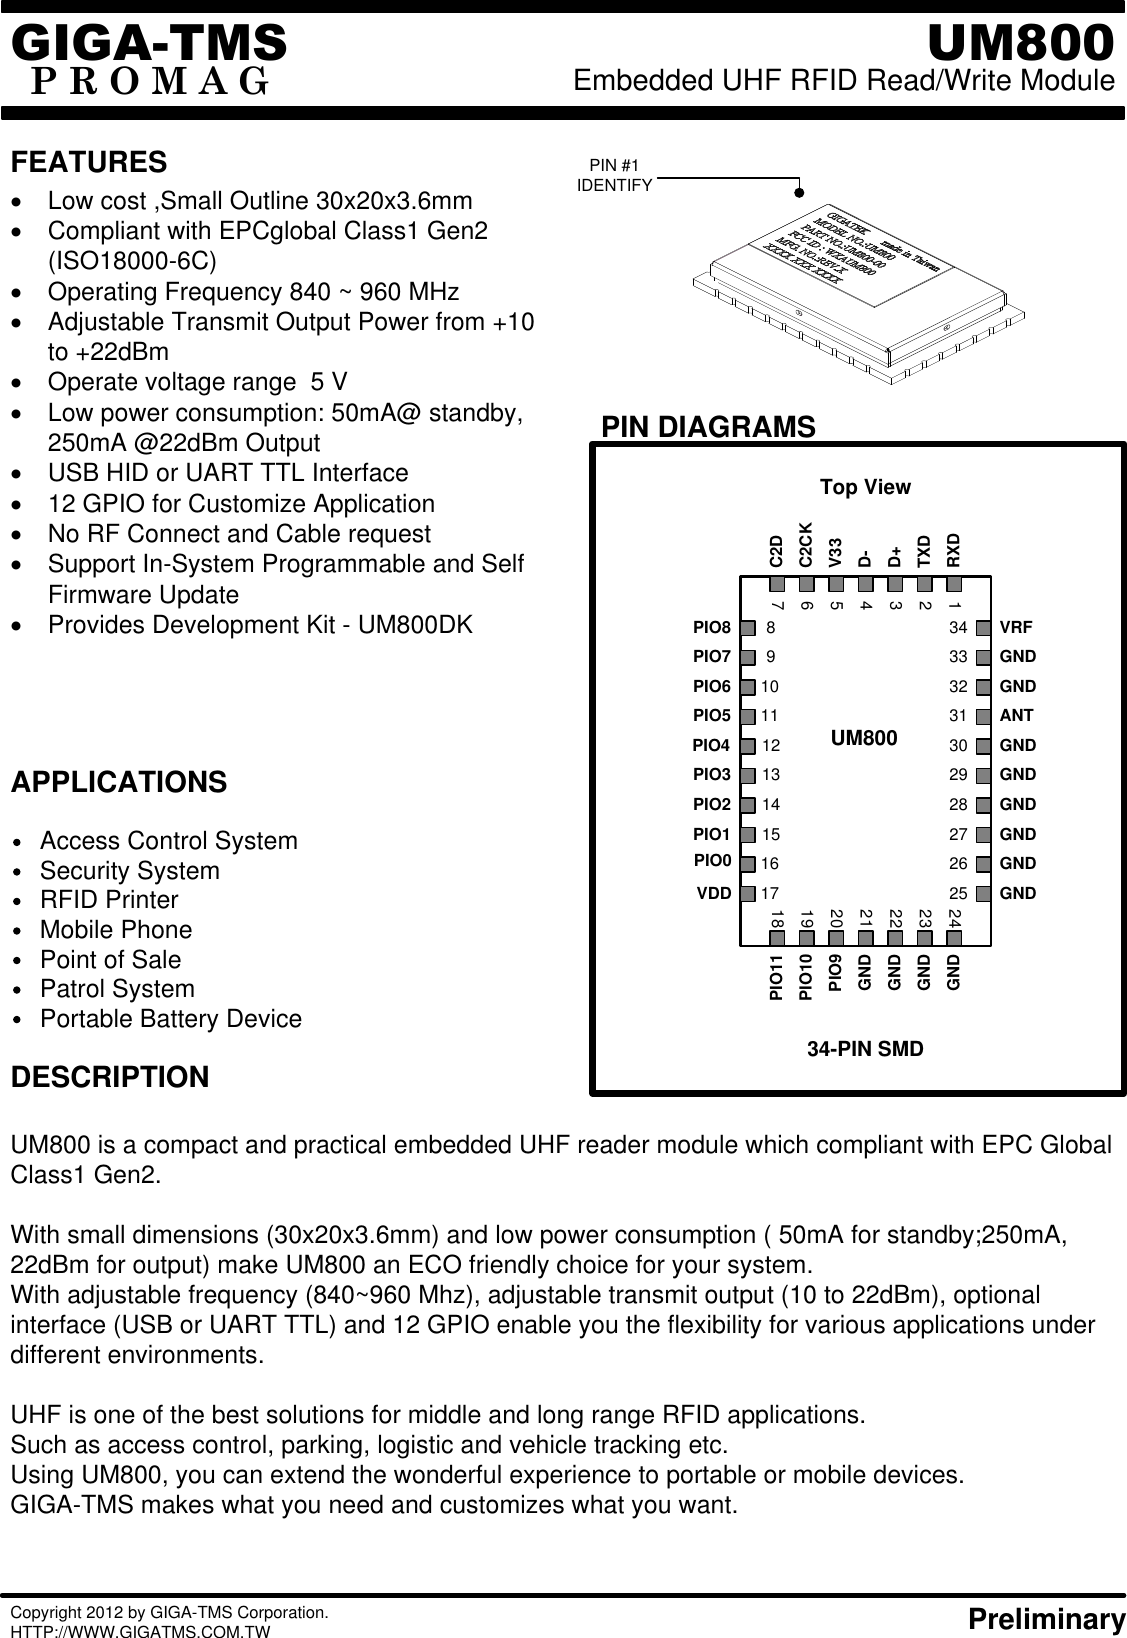 FEATURESPIN DIAGRAMSAPPLICATIONSTop View34-PIN SMD1213141530292827PIO3PIO2PIO1PIO4GNDGNDGNDANTGIGA-TMSP R O M A GUM800Embedded UHF RFID Read/Write Module DESCRIPTIONAccess Control SystemSecurity System RFID PrinterMobile PhonePoint of SalePatrol SystemUM800 is a compact and practical embedded UHF reader module which compliant with EPC Global Class1 Gen2. With small dimensions (30x20x3.6mm) and low power consumption ( 50mA for standby;250mA, 22dBm for output) make UM800 an ECO friendly choice for your system.With adjustable frequency (840~960 Mhz), adjustable transmit output (10 to 22dBm), optional interface (USB or UART TTL) and 12 GPIO enable you the flexibility for various applications under different environments.UHF is one of the best solutions for middle and long range RFID applications.Such as access control, parking, logistic and vehicle tracking etc.Using UM800, you can extend the wonderful experience to portable or mobile devices.GIGA-TMS makes what you need and customizes what you want.·  Low cost ,Small Outline 30x20x3.6mm·  Compliant with EPCglobal Class1 Gen2 (ISO18000-6C)·  Operating Frequency 840 ~ 960 MHz·  Adjustable Transmit Output Power from +10 to +22dBm·  Operate voltage range  5 V·  Low power consumption: 50mA@ standby, 250mA @22dBm Output·  USB HID or UART TTL Interface·  12 GPIO for Customize Application  ·  No RF Connect and Cable request·  Support In-System Programmable and Self Firmware Update·  Provides Development Kit - UM800DKCopyright 2012 by GIGA-TMS Corporation. HTTP://WWW.GIGATMS.COM.TW     PreliminaryPIN #1IDENTIFY31GND11PIO5910PIO6PIO78PIO83332 GNDVRF34GNDUM800Portable Battery Device12345671617242322212019182526RXDTXDD+D-V33C2DC2CKPIO11GNDGNDGNDGNDPIO9PIO10VDDPIO0 GNDGND